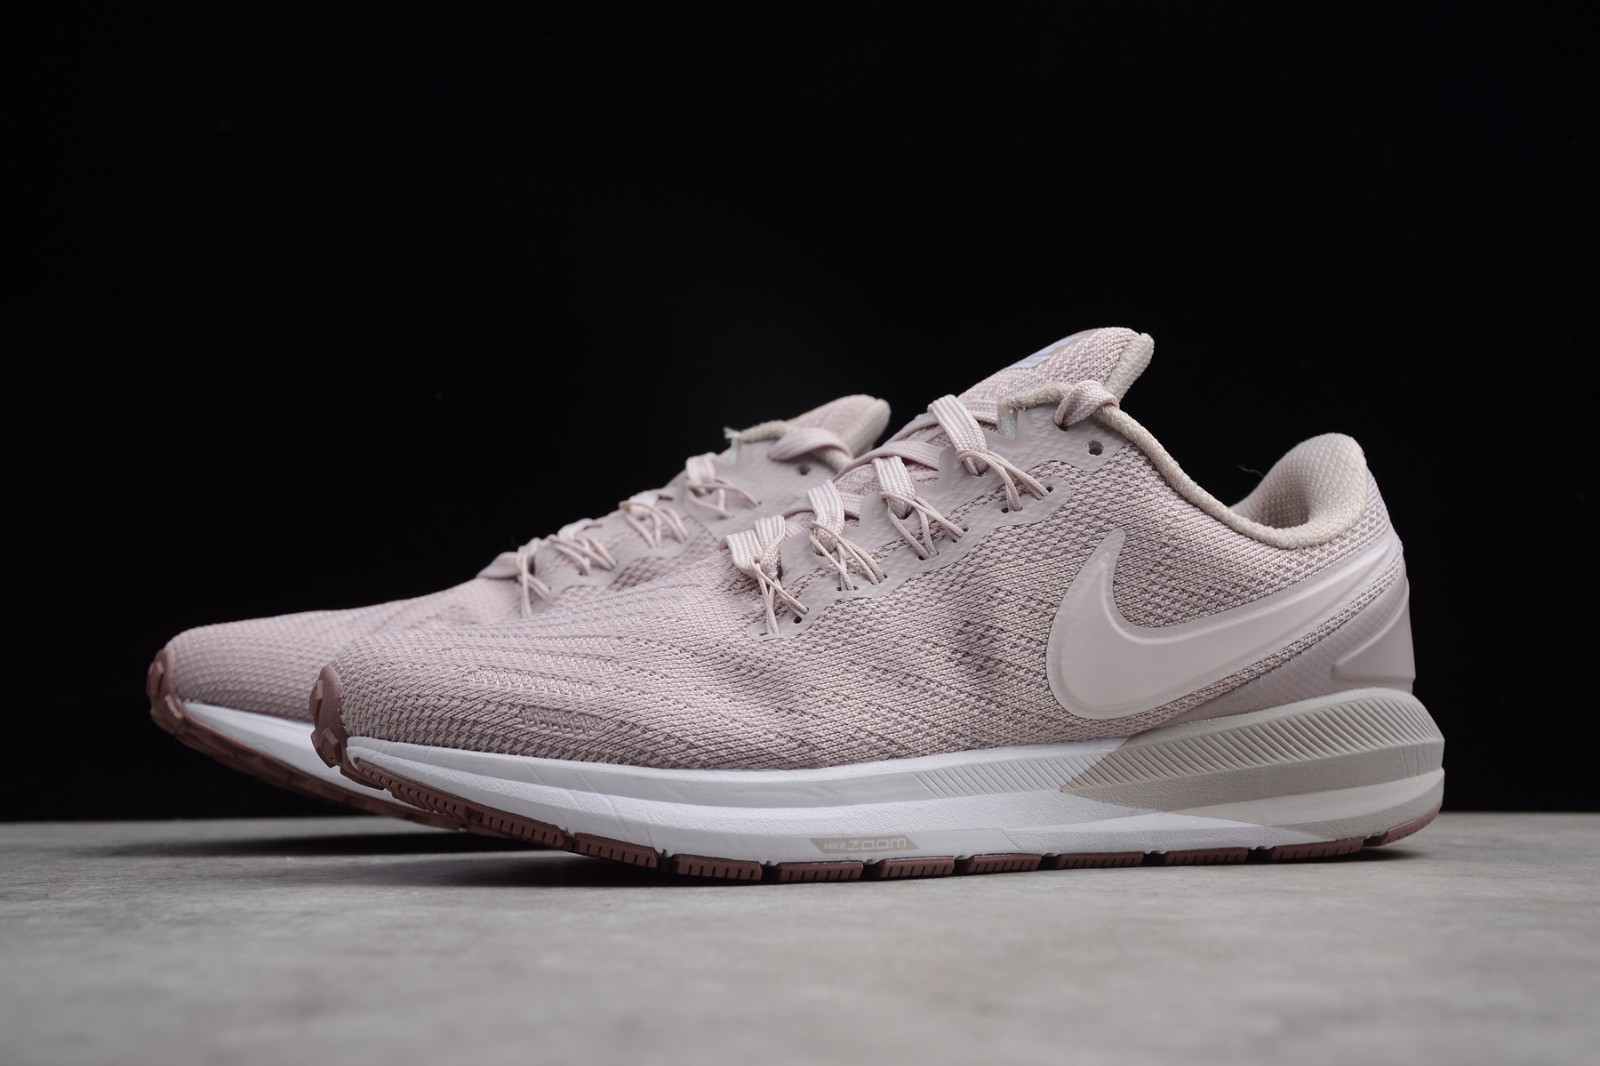 Uitvoerder Stapel Giotto Dibondon Nike Air Zoom Structure 22 Particle Rose Pale Pink White Womens Running  Shoes AA1640 600 - GmarShops - Sneaker Politics x Reebok NPC UK NCL  Storyville